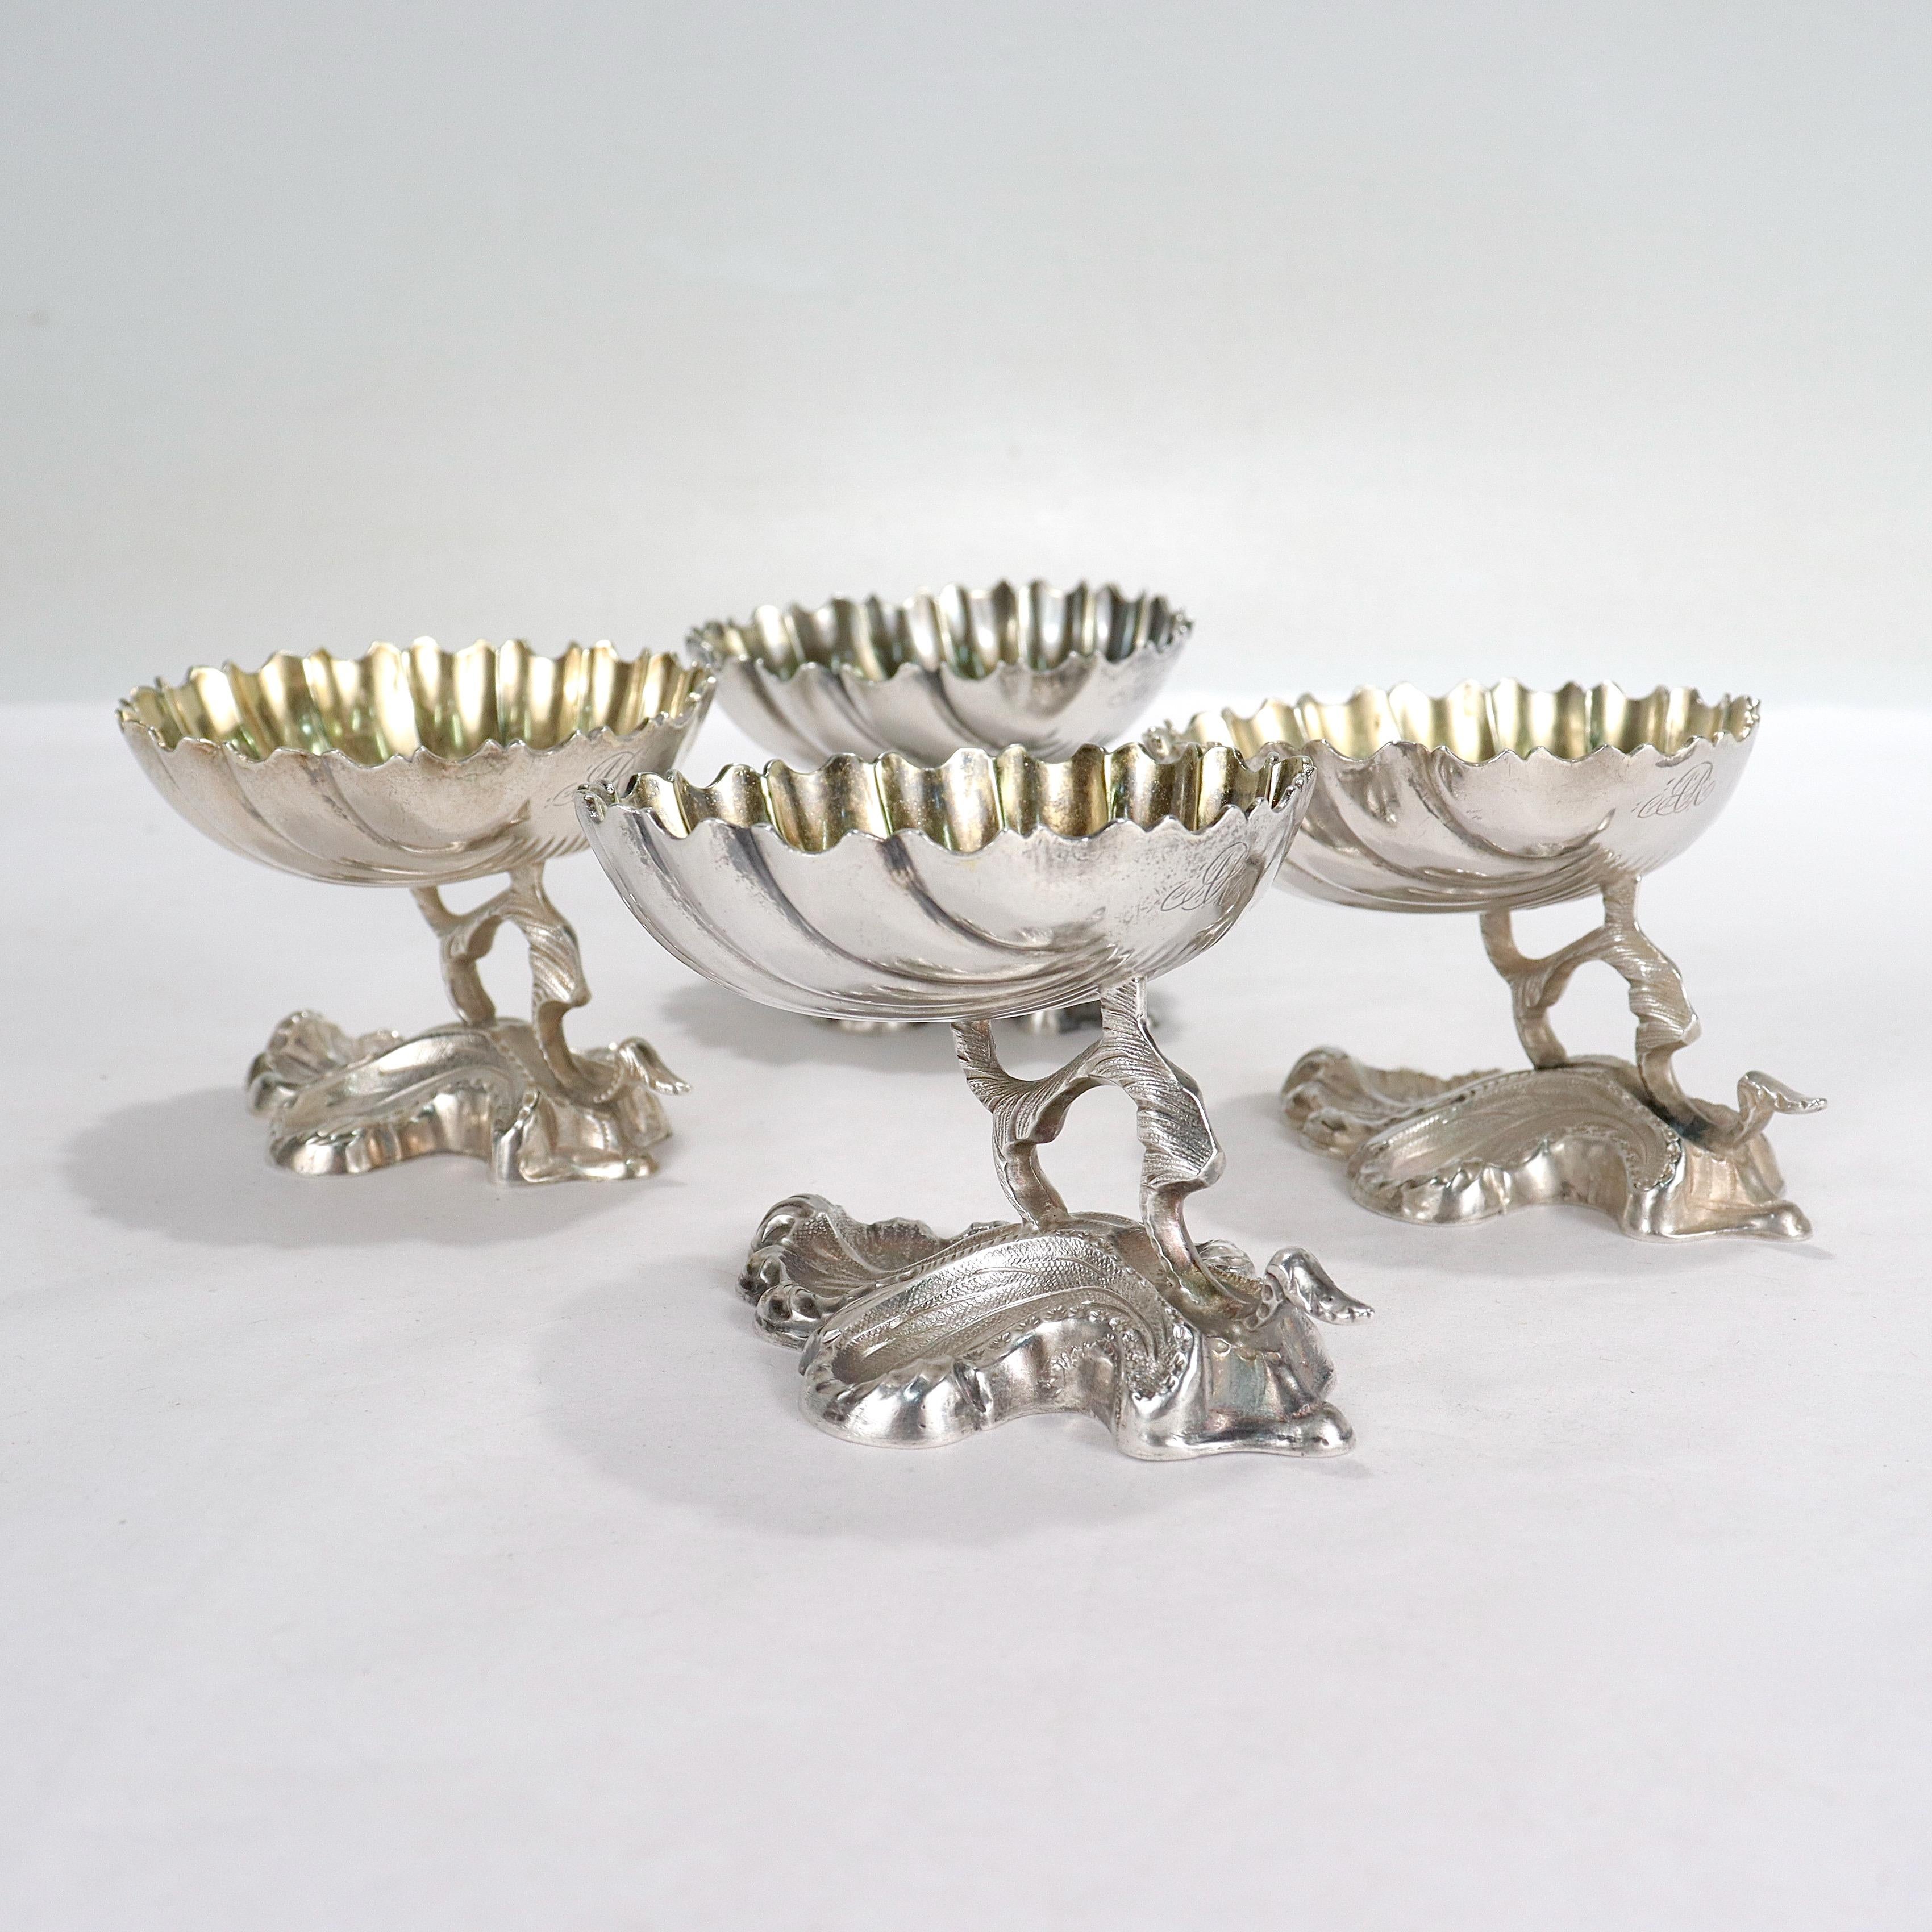 A fine set of 4 silver salt cellars.

By R&W Wilson.

In coin silver.

With shell shaped bowls supported on shaped feet. 

Each with an 